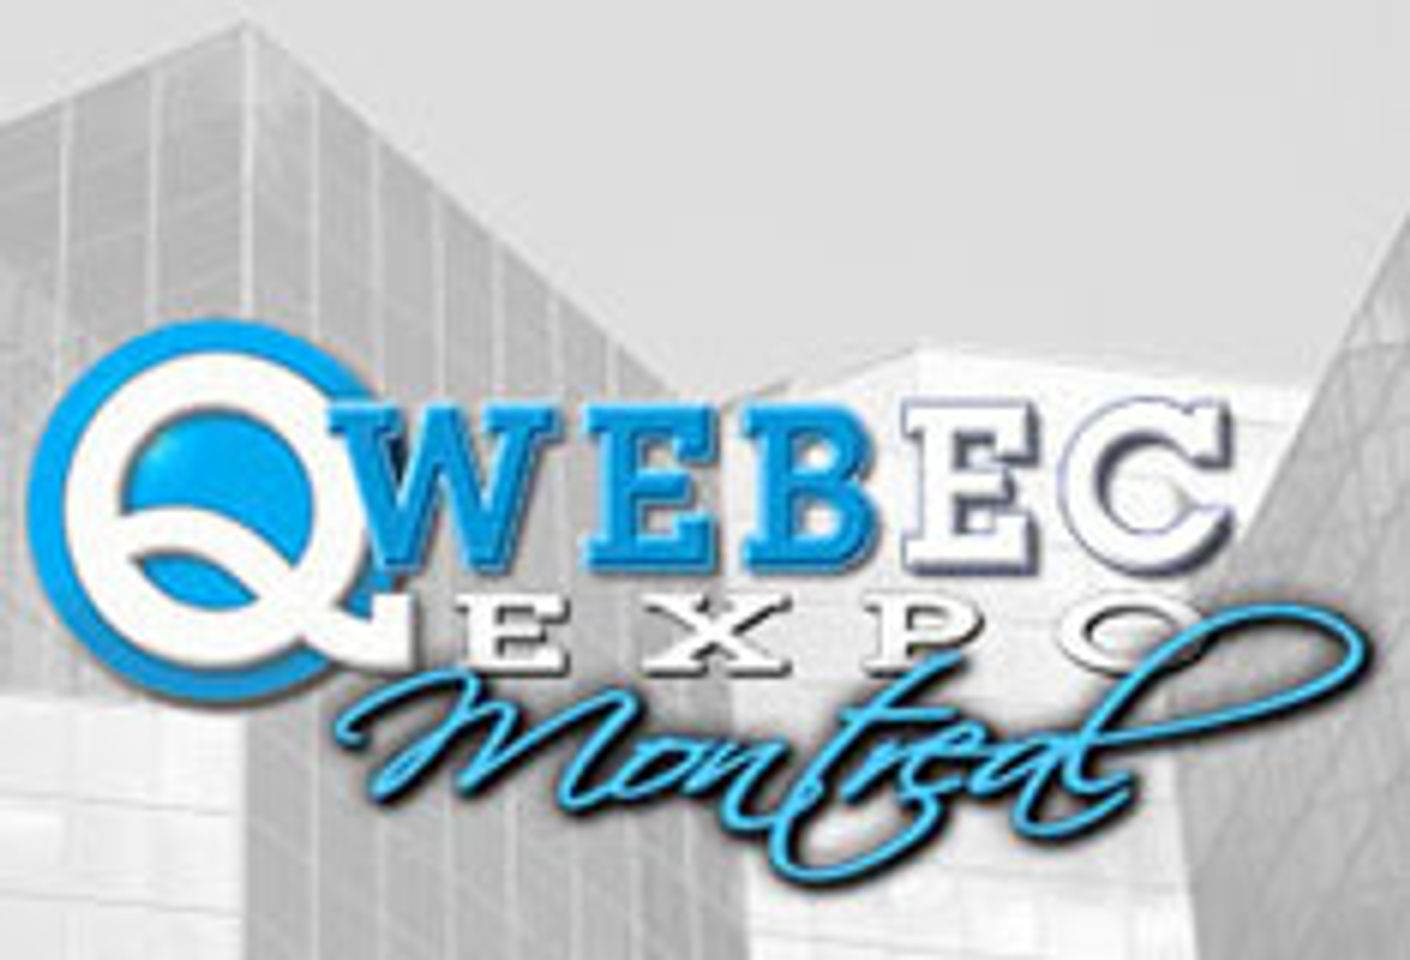 QWEBEC Expo Early Bird Registrations is Open